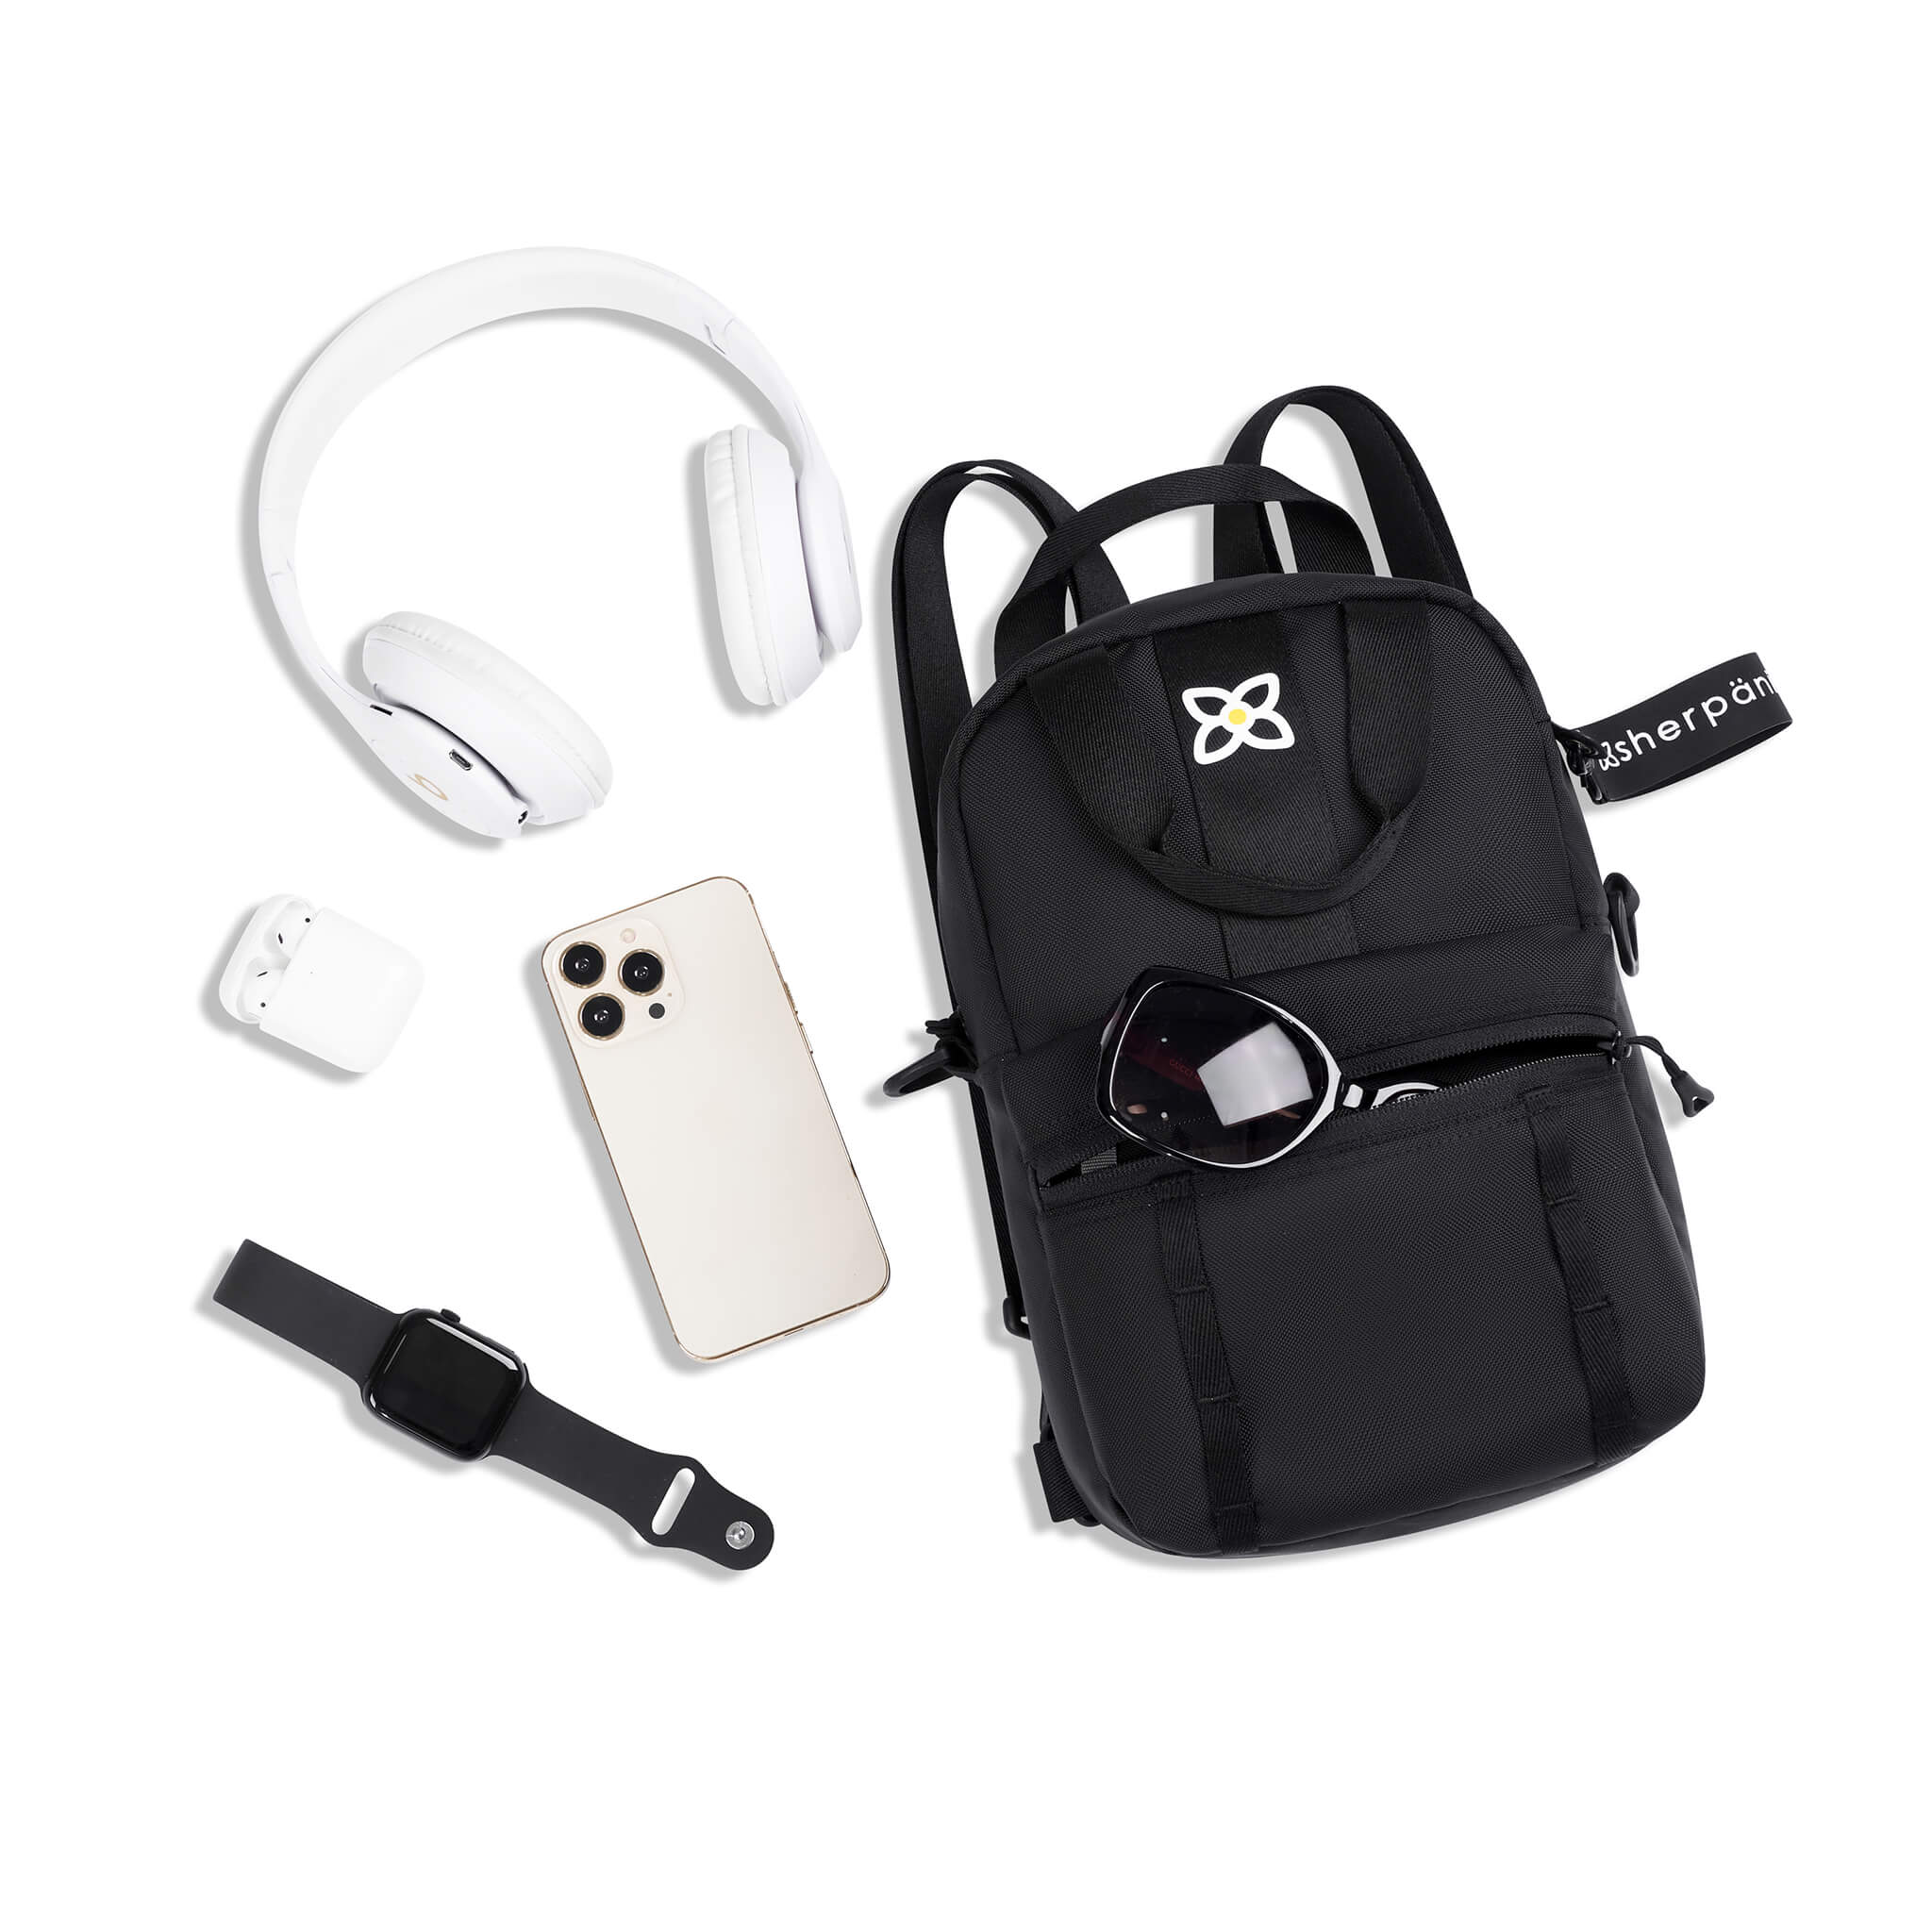 Top view of example items to fill the bag. Sherpani Logan mini backpack in Raven lies next to the following items: headphones, AirPods, phone, smartwatch and sunglasses. 